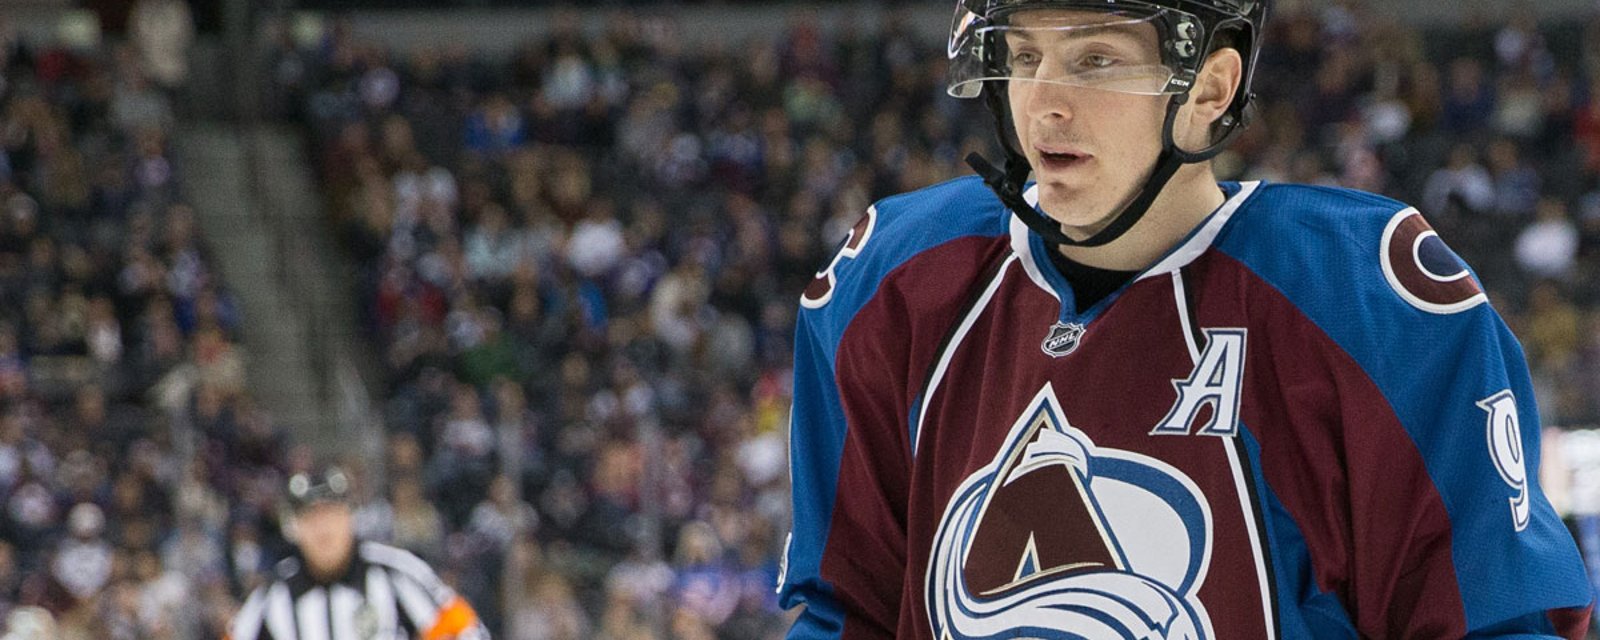 Trade rumors: a team “is very much in there on Duchene” says NHL Insider